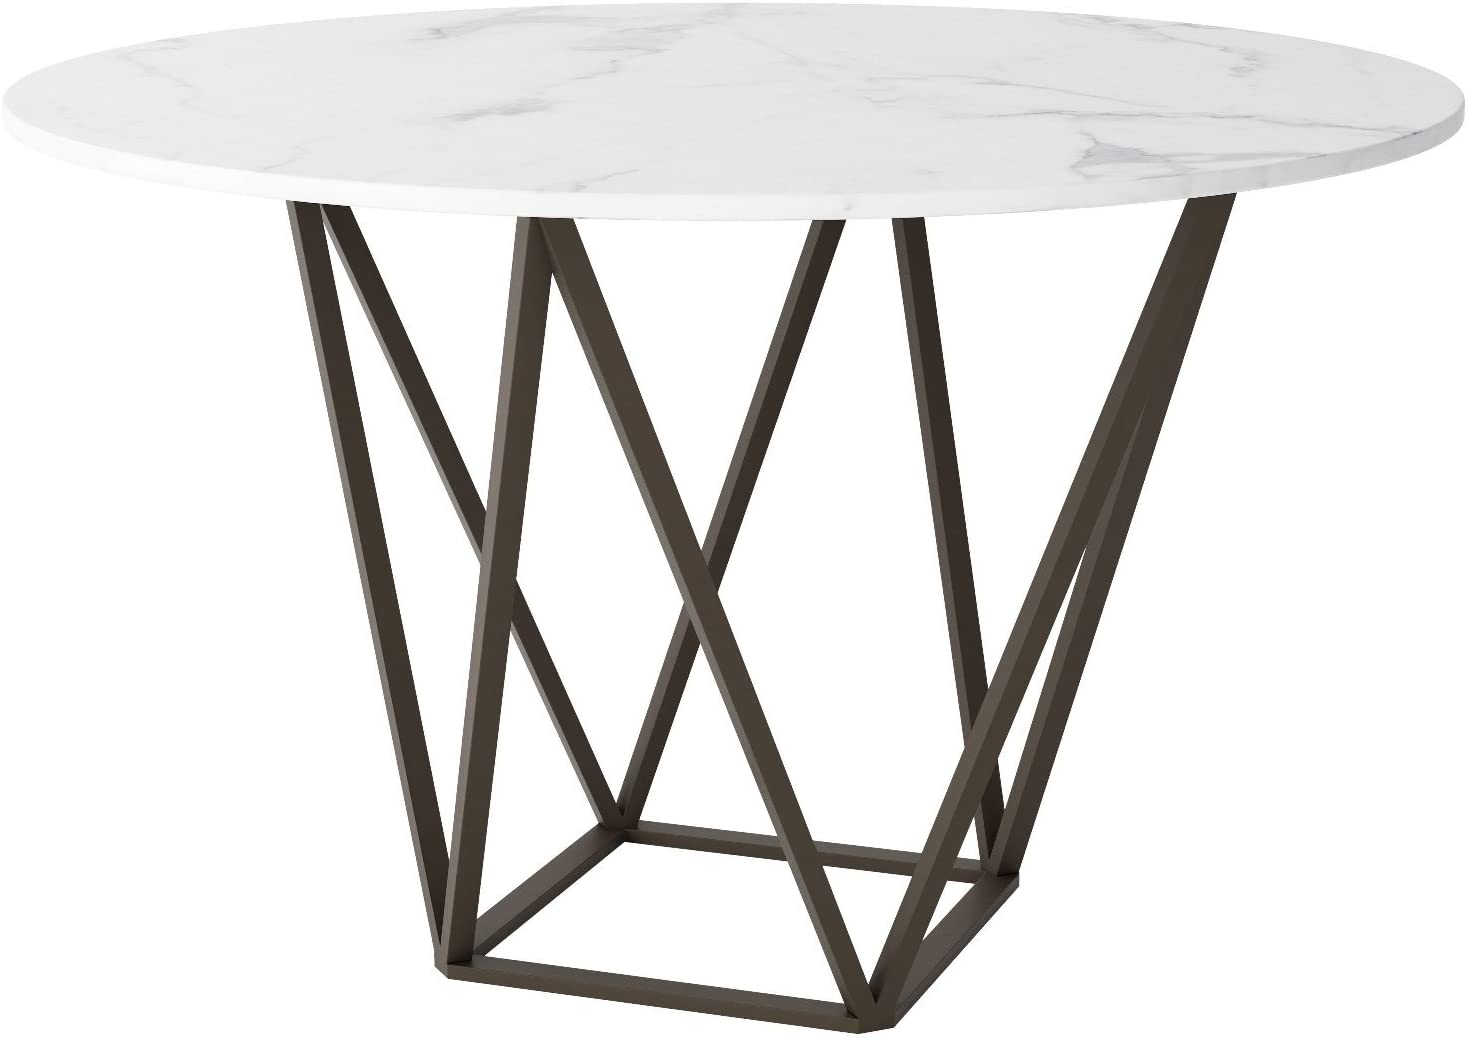 B07647H5GV Modern Contemporary Urban Design Kitchen Room Dining Table, White Brass, Faux Marble